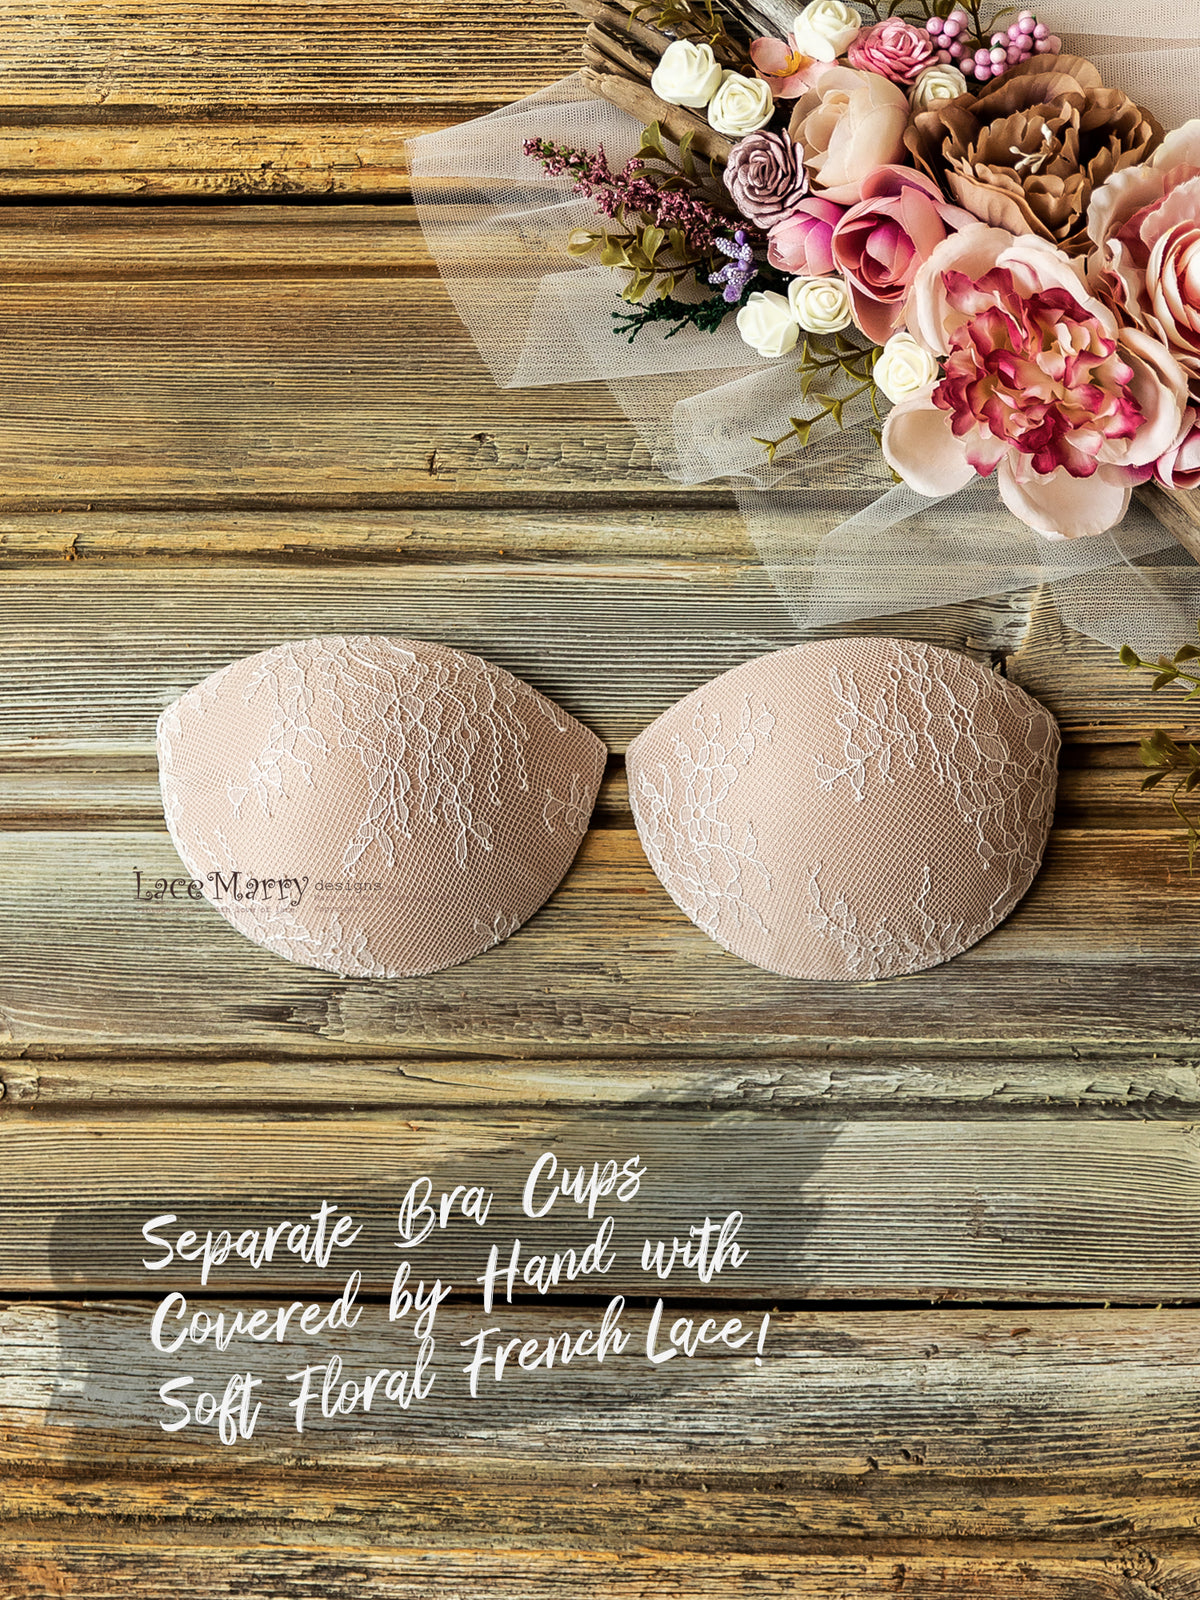 Bridal Lace Bra Cups in Nude Color